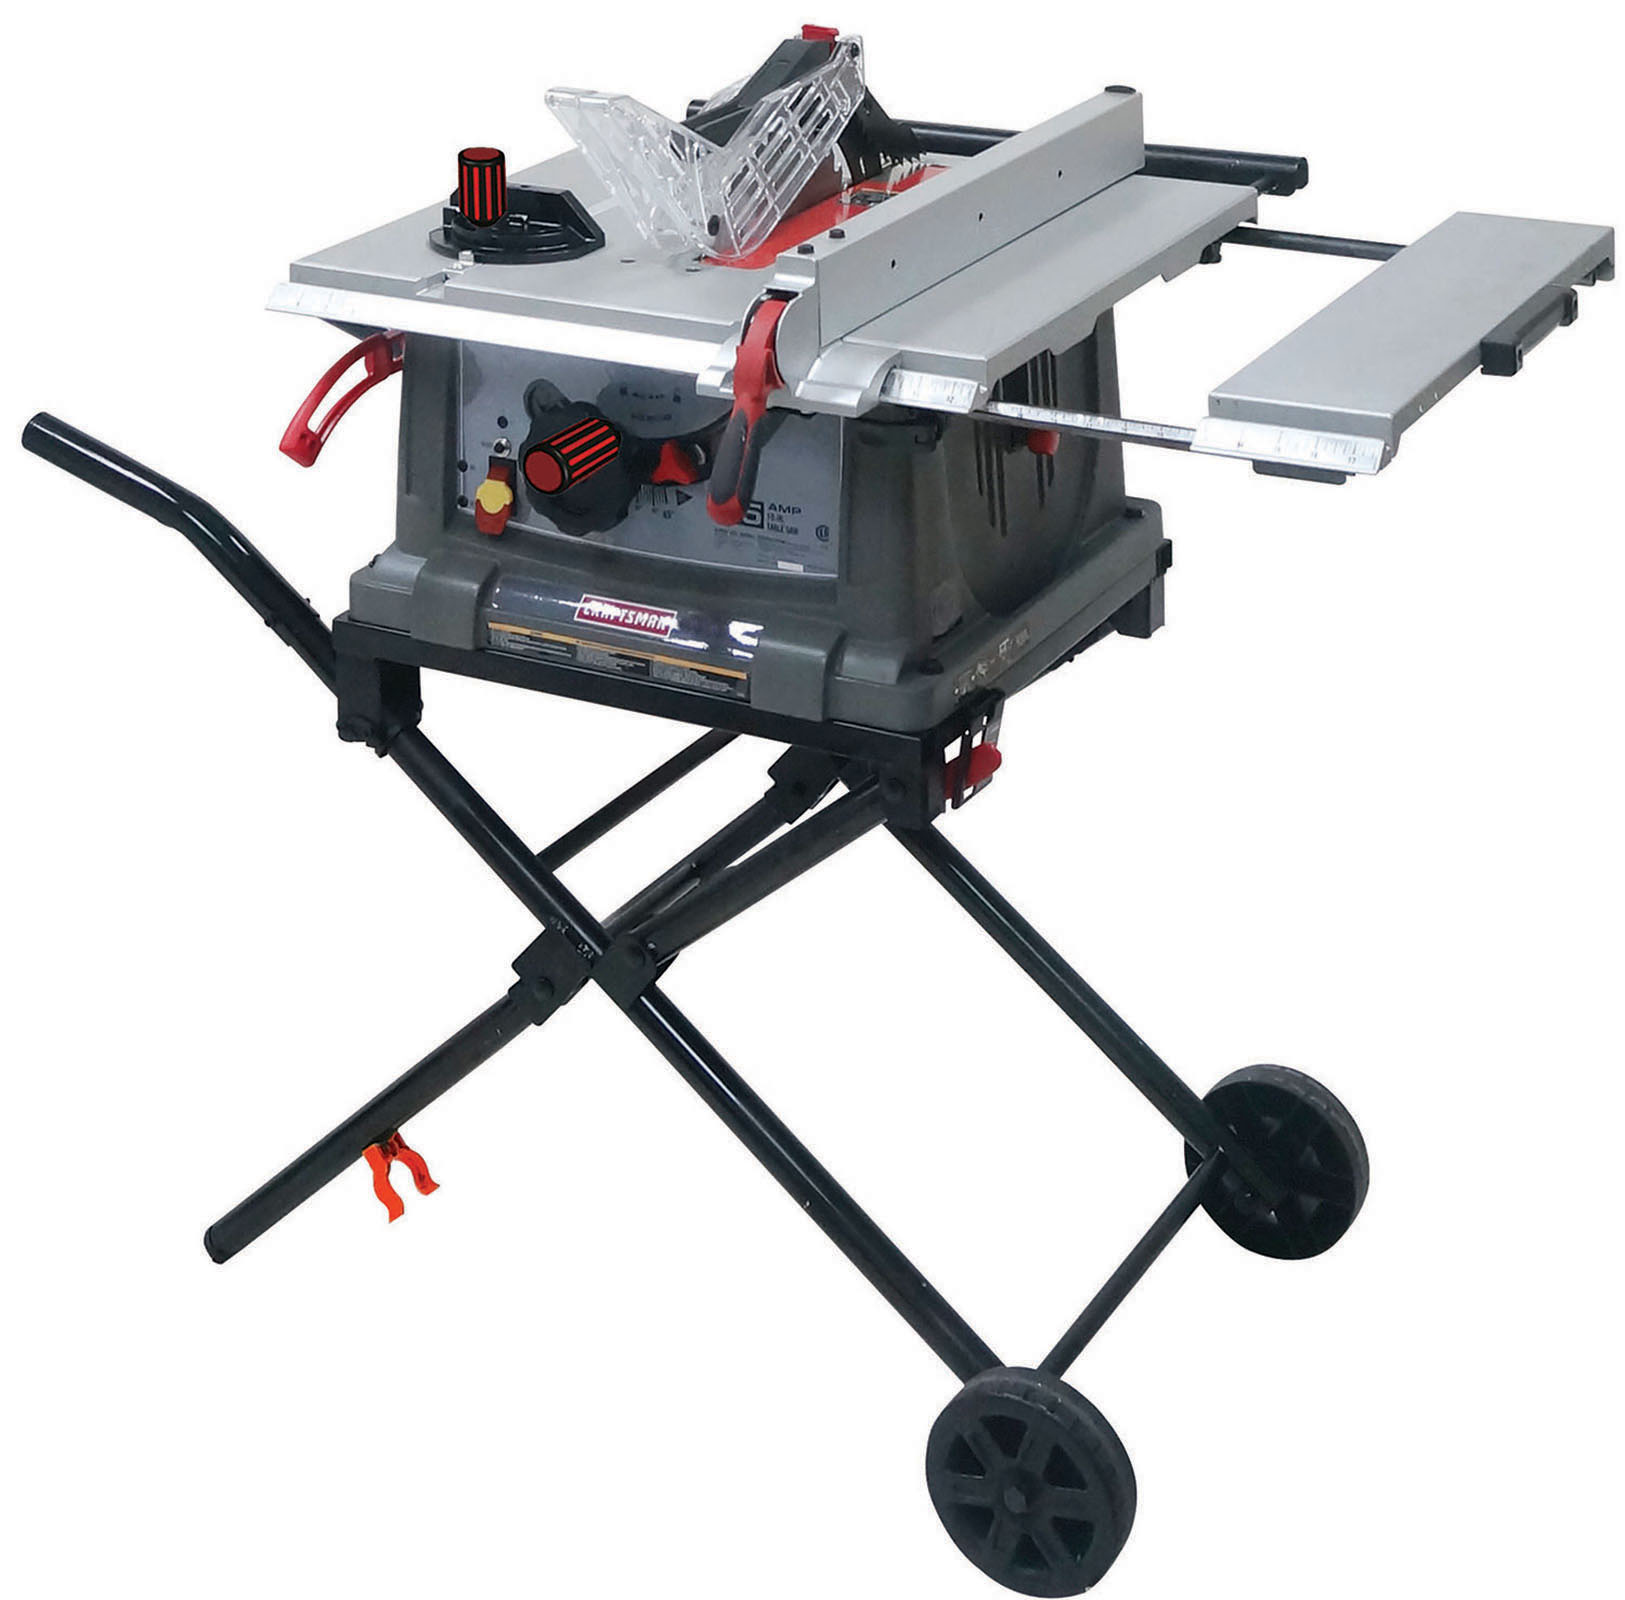 Craftsman 10" Portable Table Saw | Shop Your Way: Online Shopping